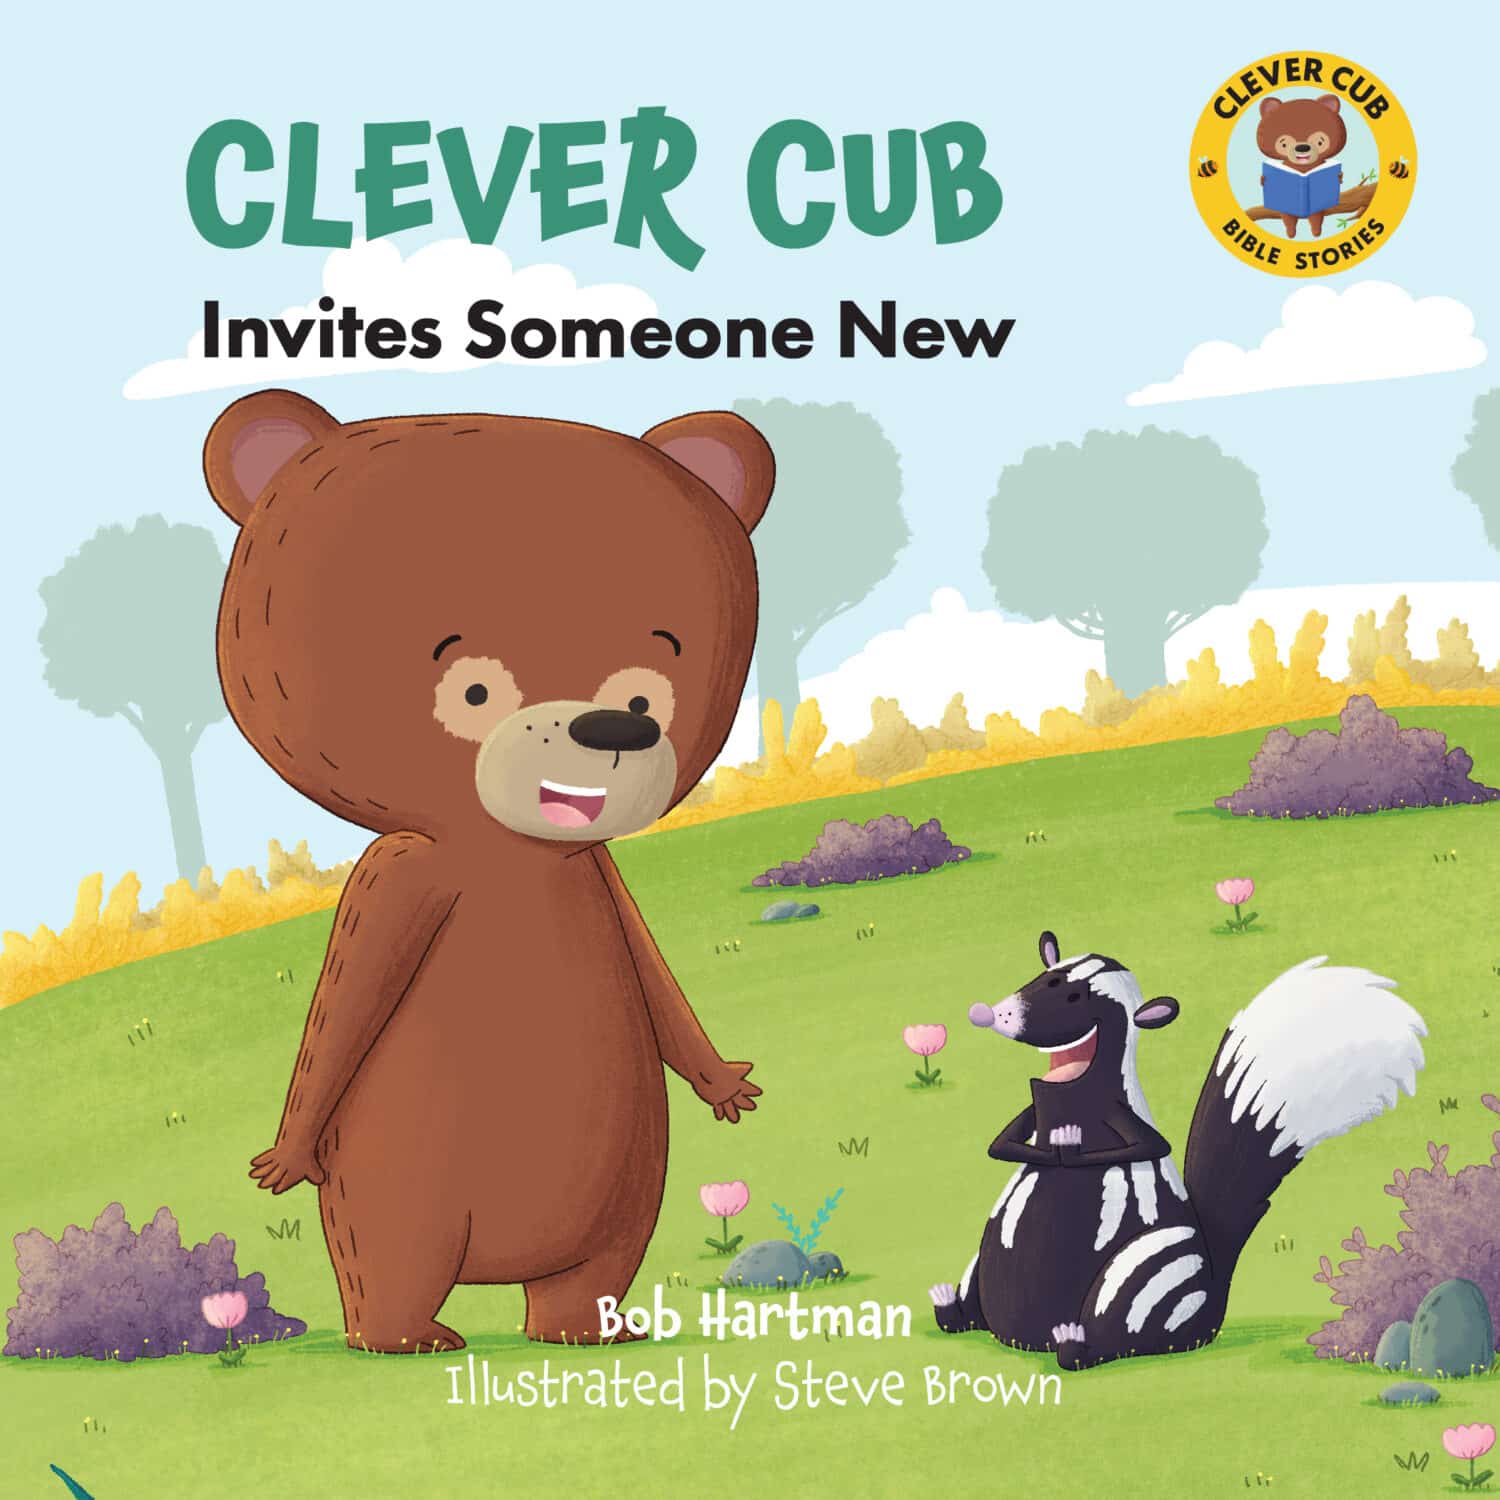 Clever Cub book cover image